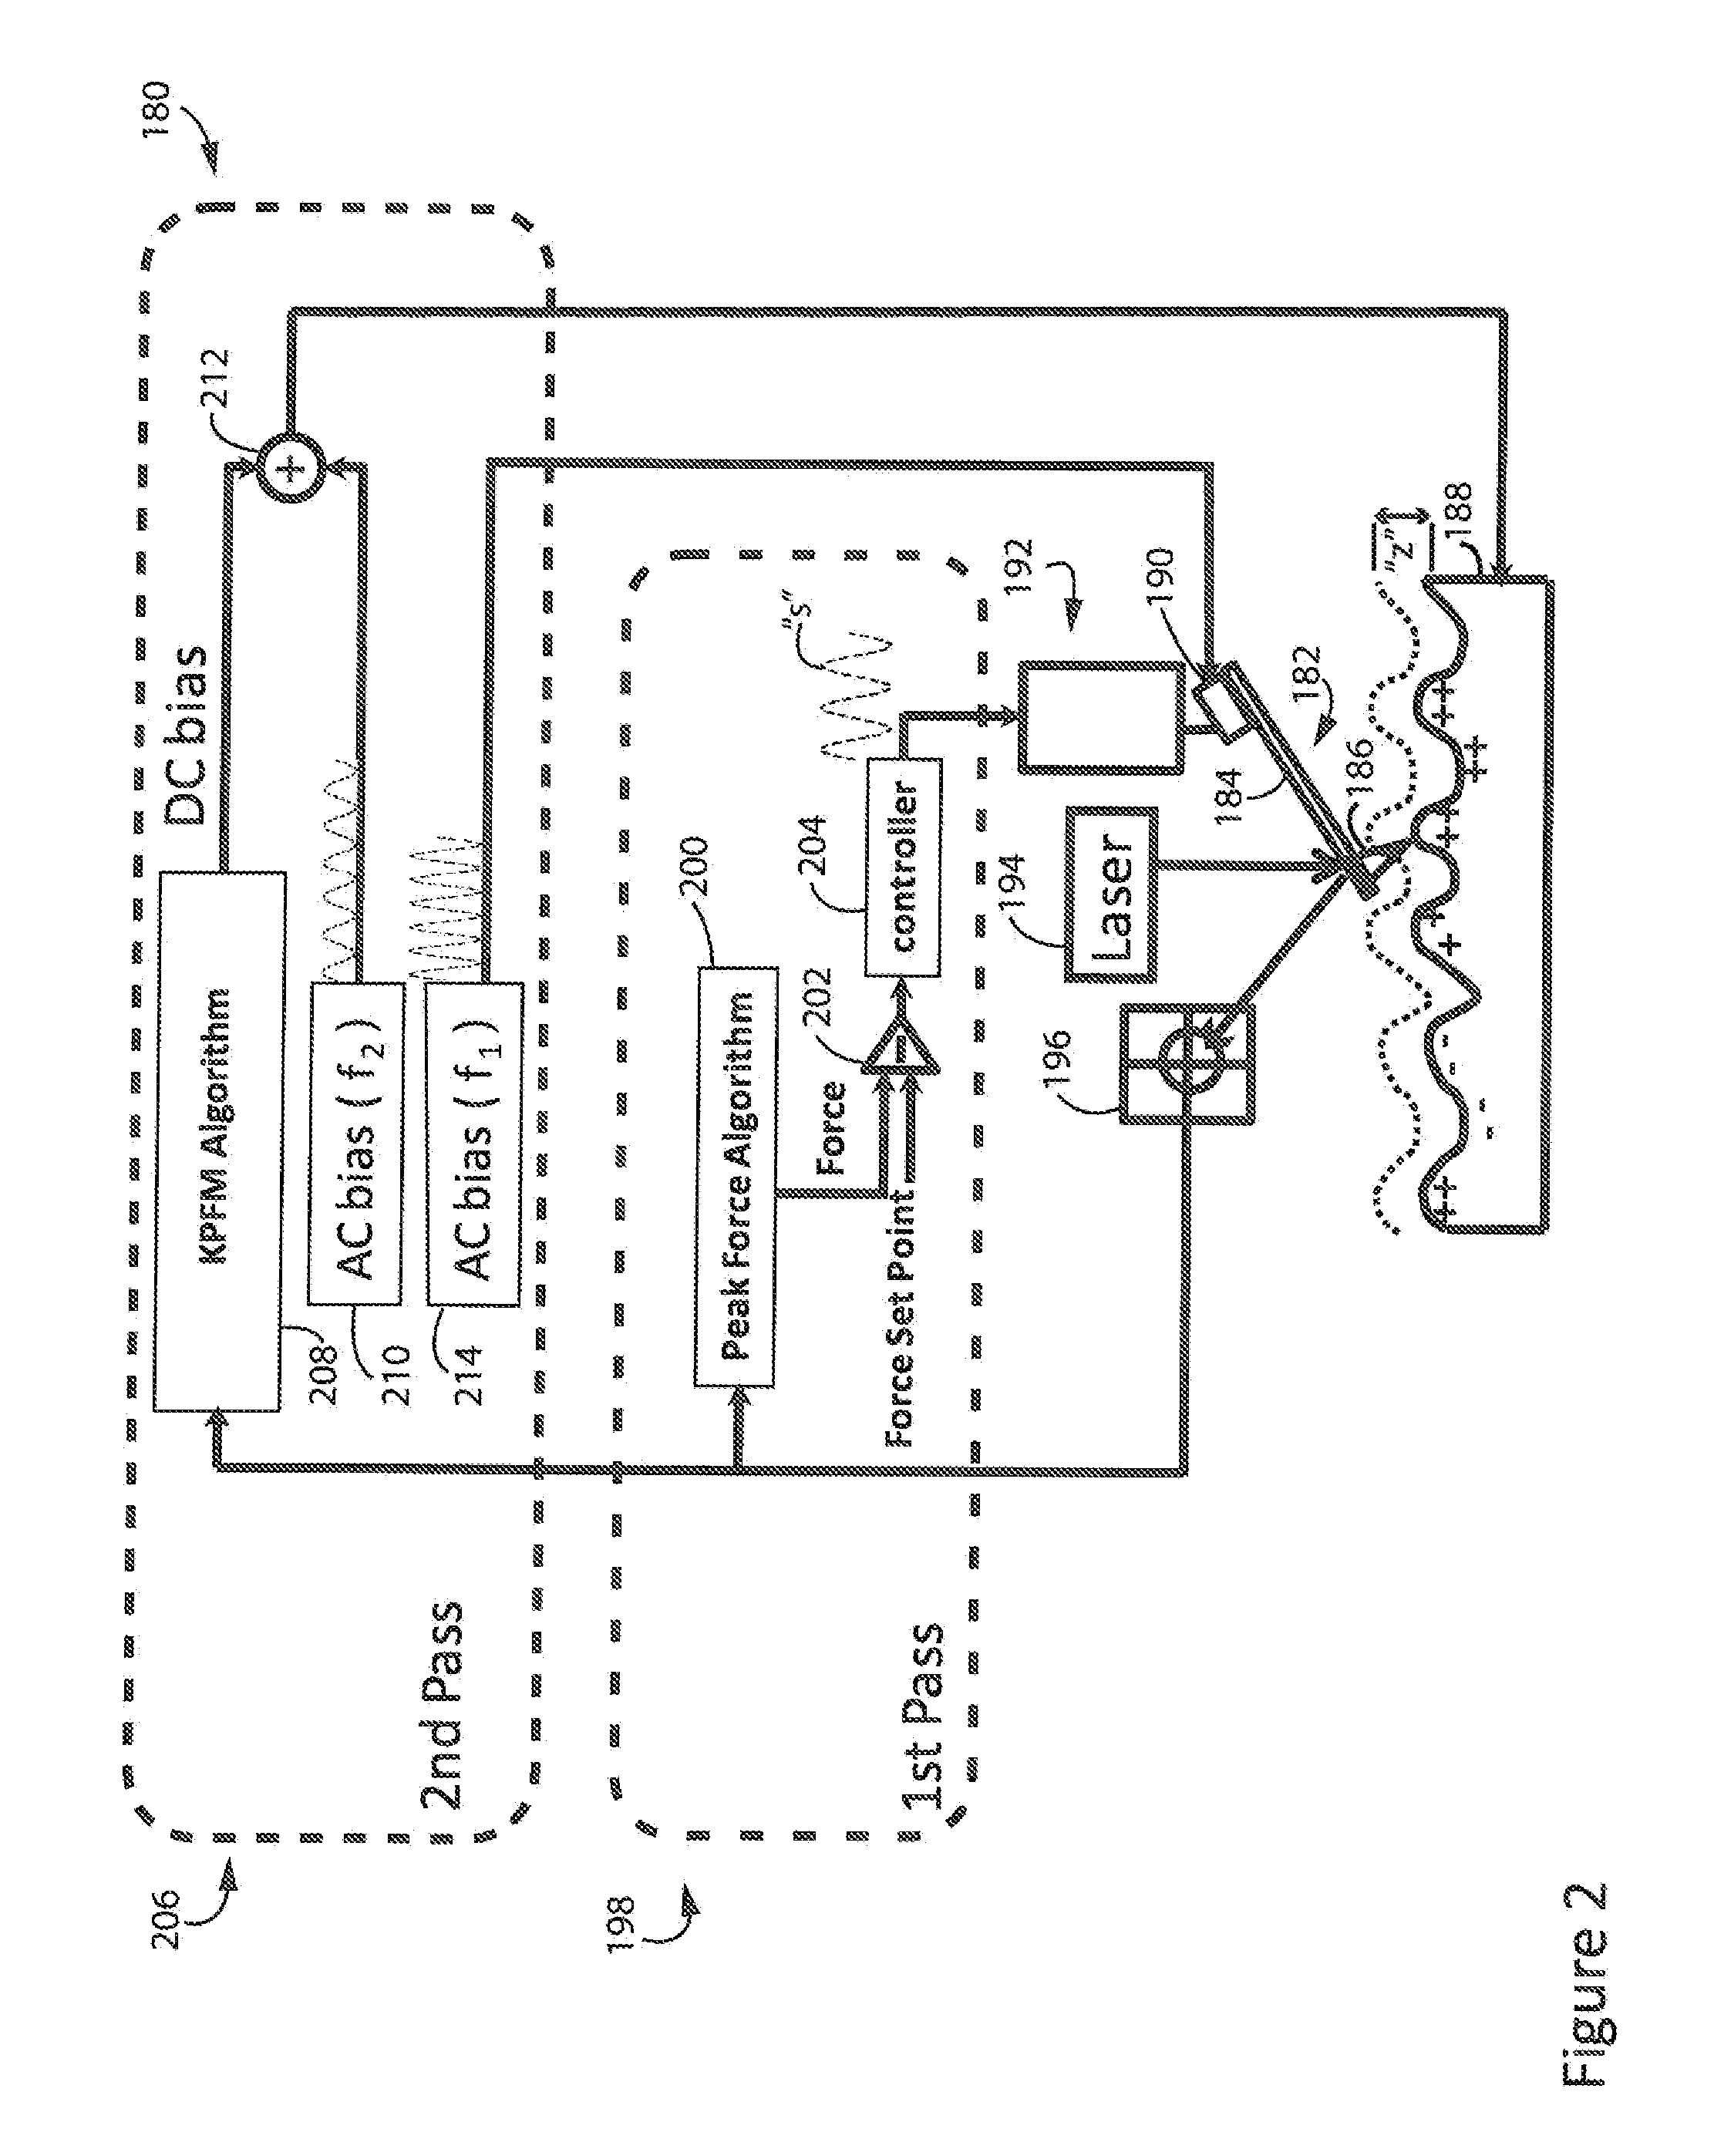 Method and Apparatus of Electrical Property Measurement Using an AFM Operating in Peak Force Tapping Mode